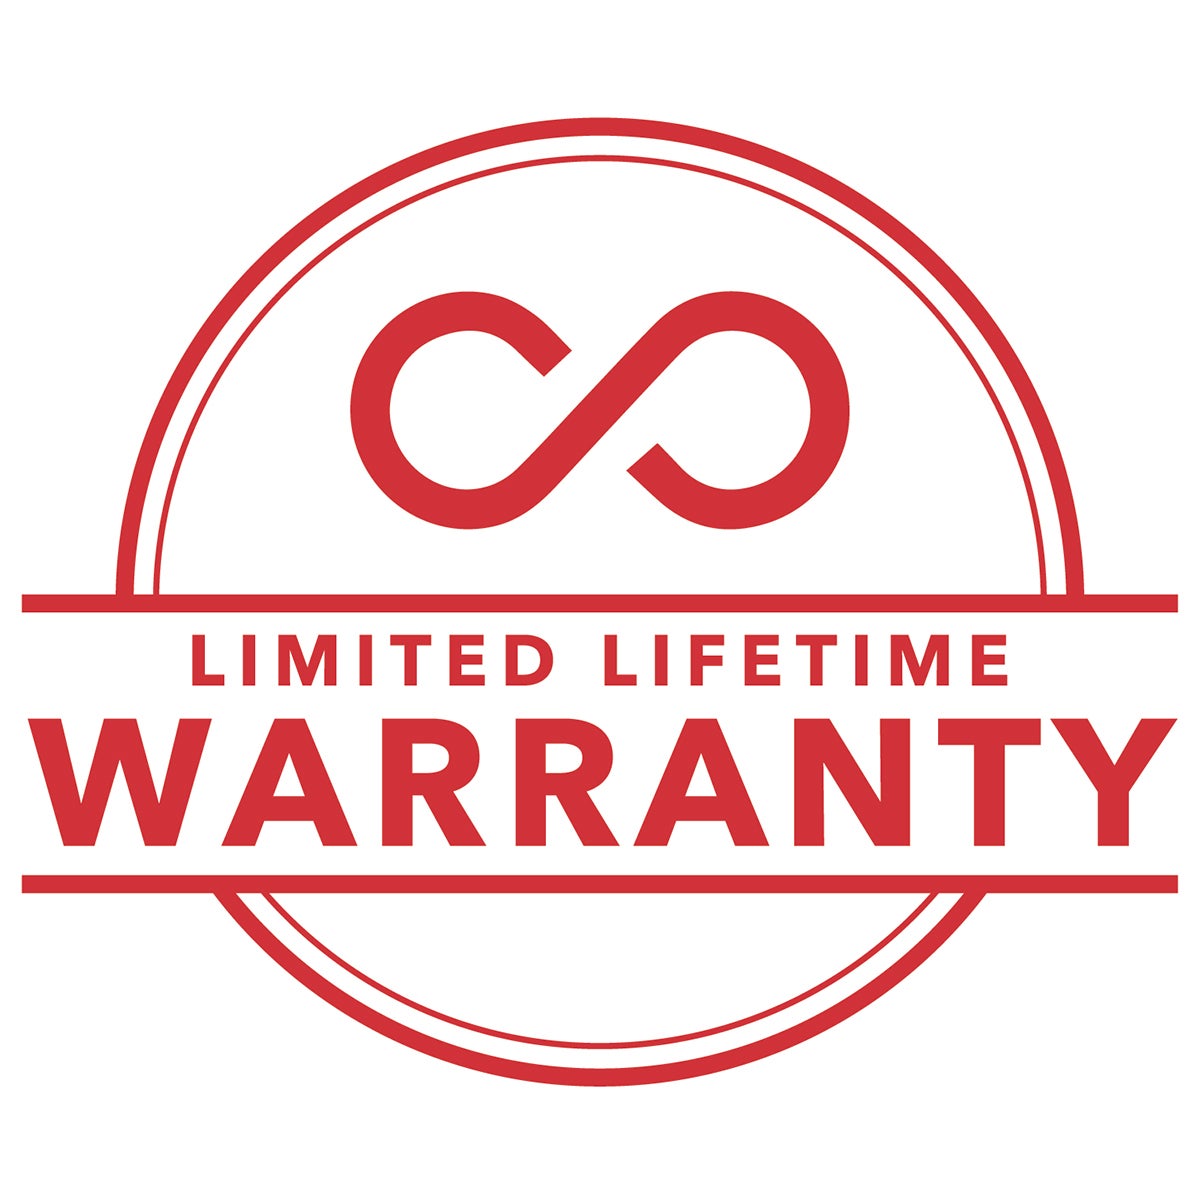 Limited Lifetime Warranty||If your GlassFusion+ ever gets worn or damaged, we will replace it for as long as you own your device.